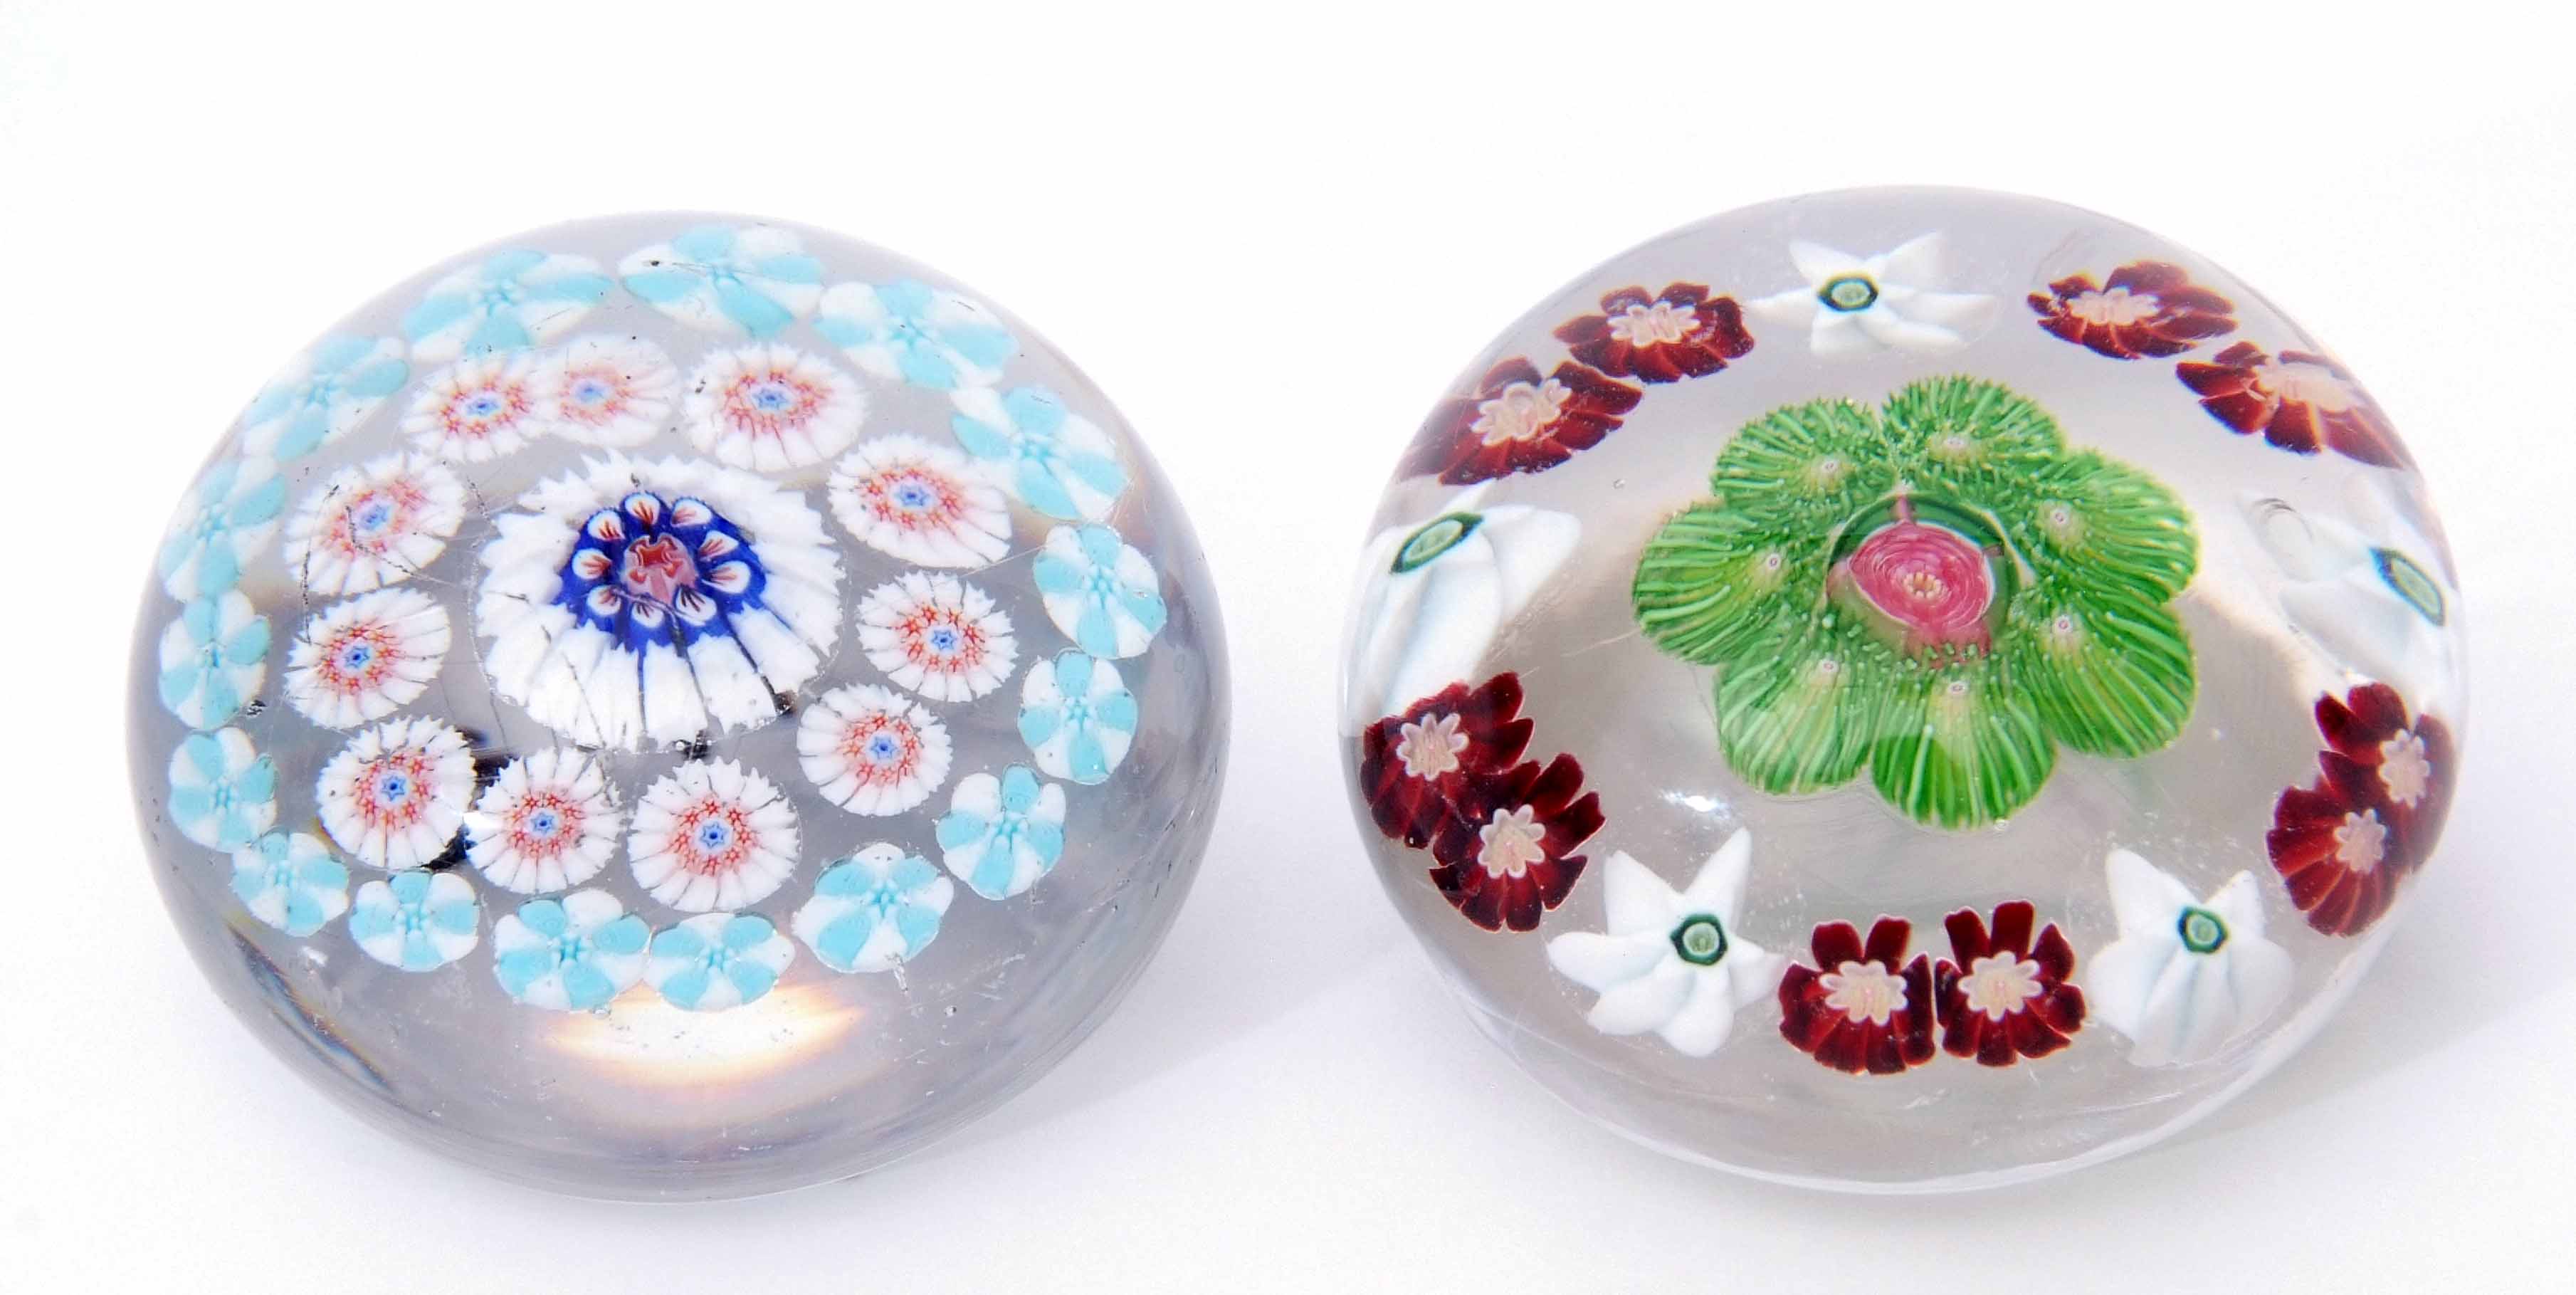 Clichy miniature concentric millefiori paperweight, clear glass with central pink and green rose - Image 2 of 2